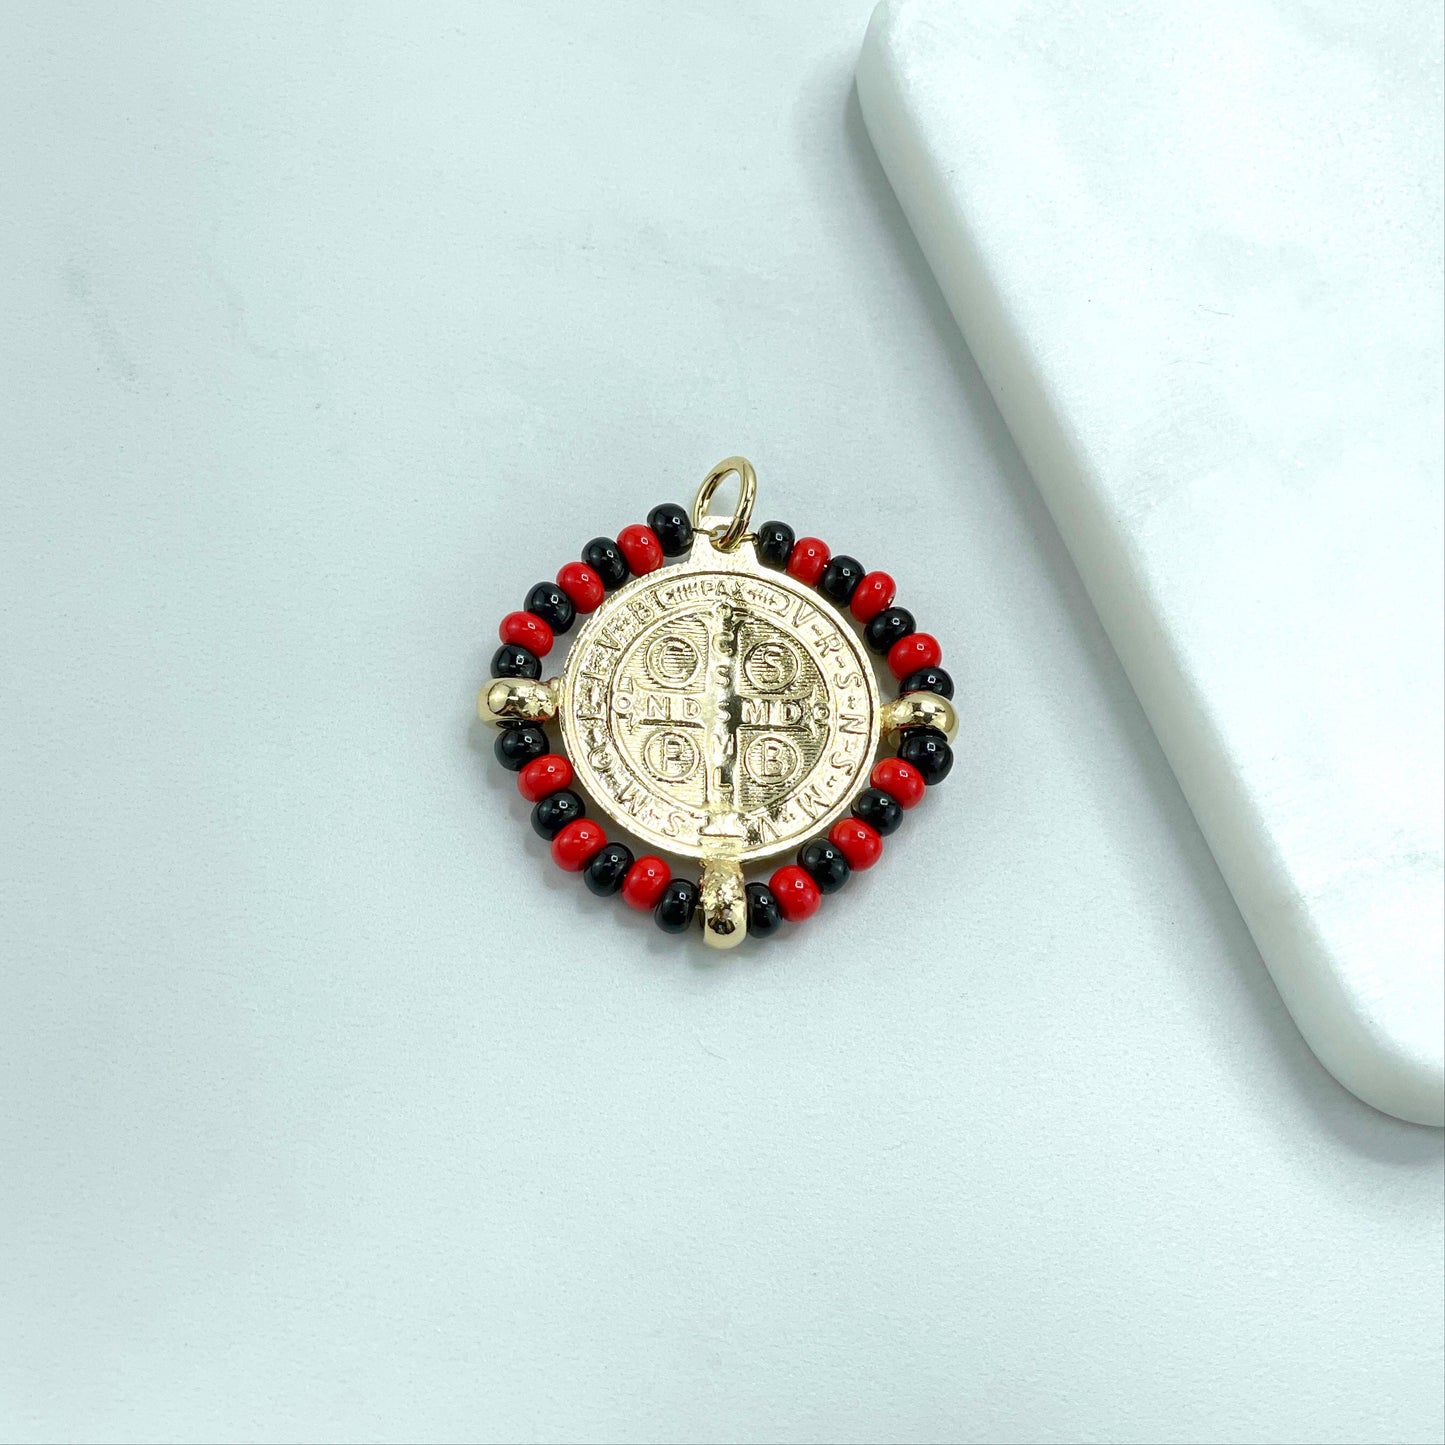 18k Gold Filled San Benito Coin, Black & Red Beads, 2 Sided Round Pendant Charms, Reversible San Benito, Wholesale Jewelry Making Supplies